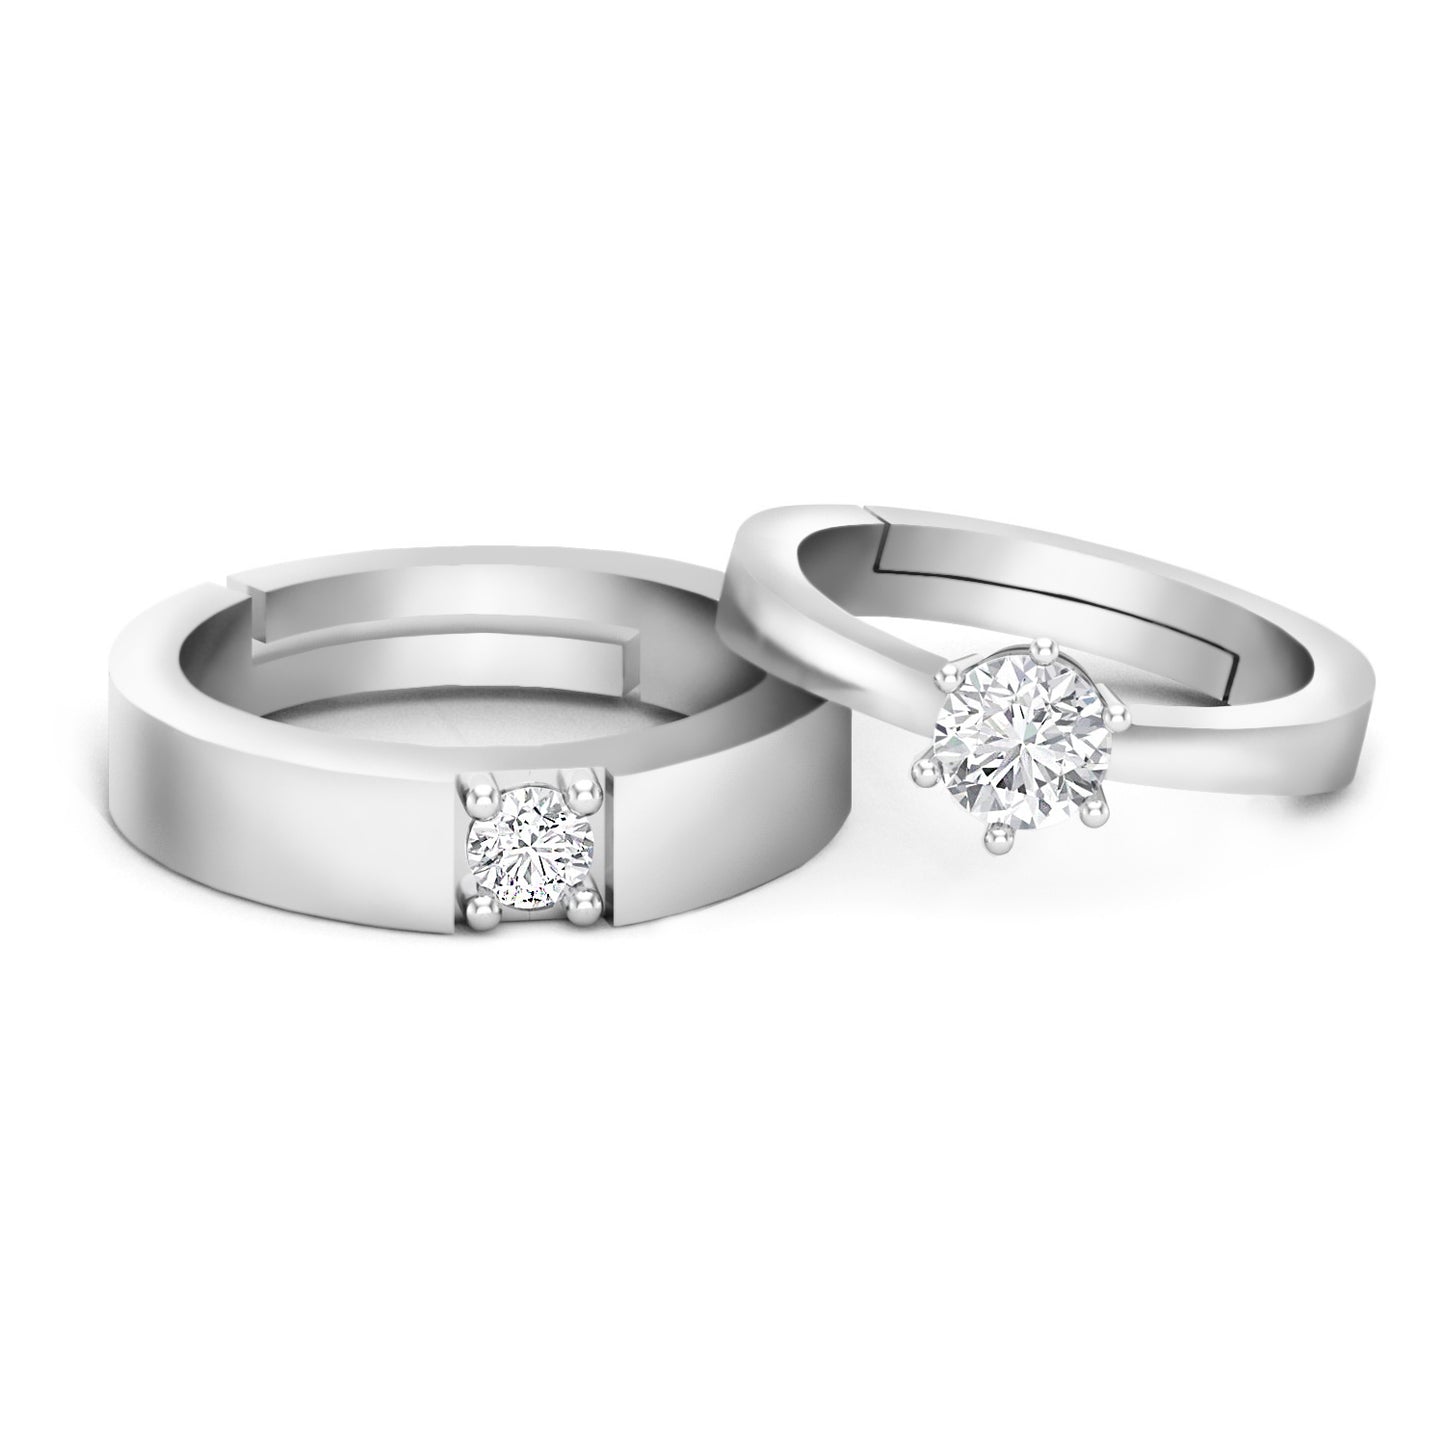 Ross & Rachel Couple Solitaire Ring - 925 Silver